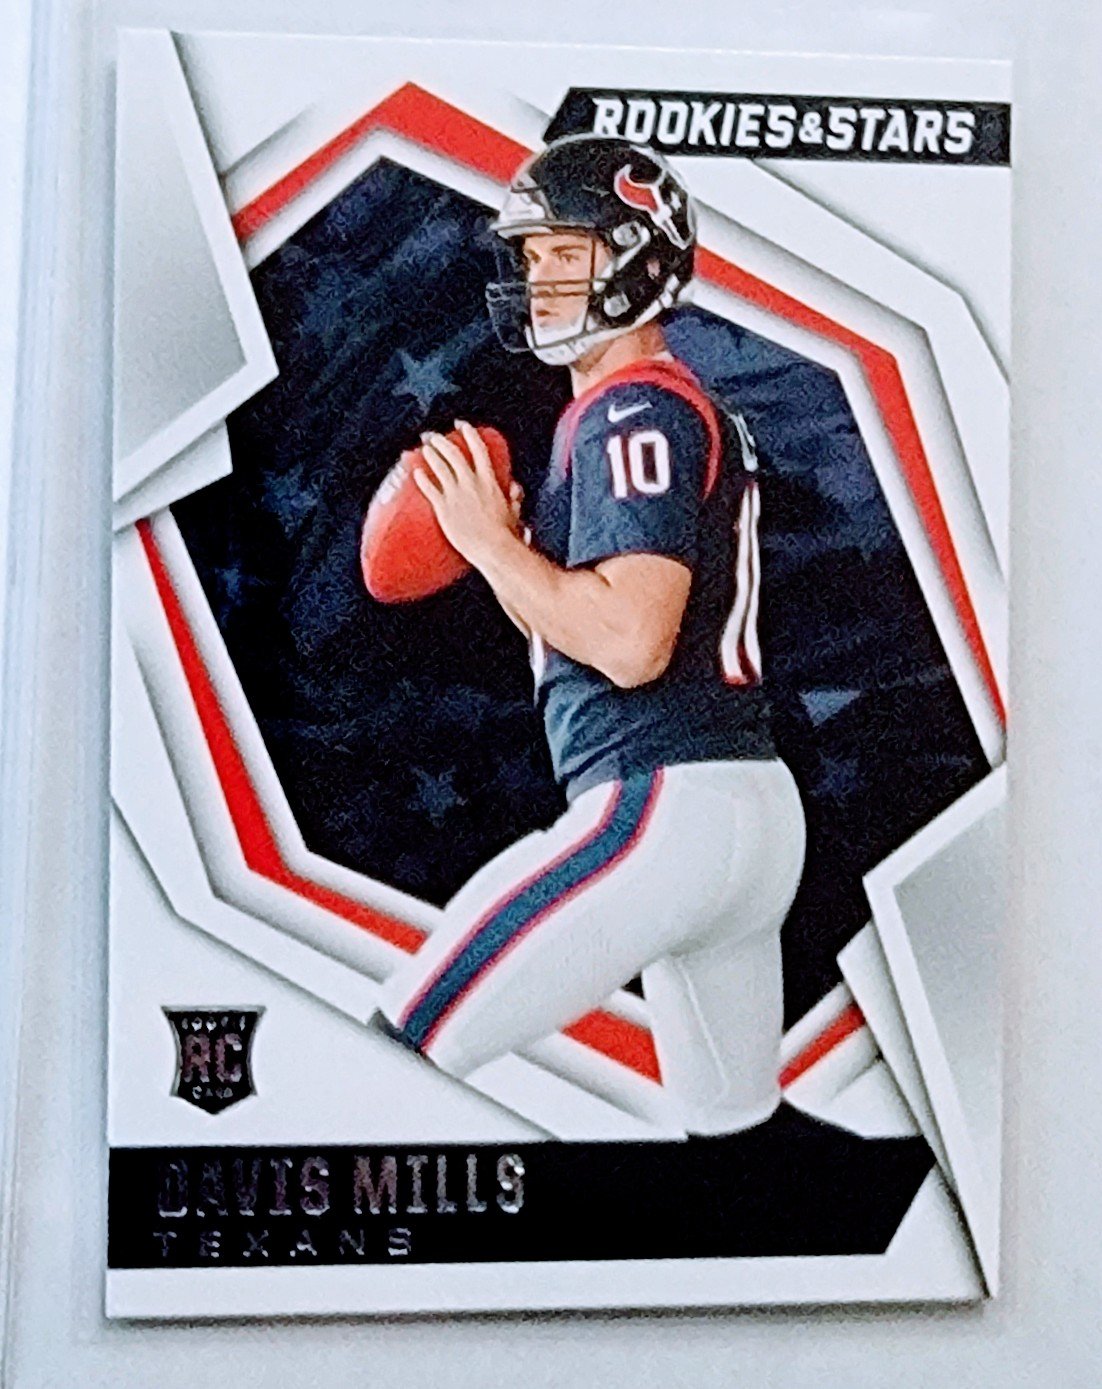 2021 Panini Rookies and Stars Davis Mills Rookie Football Card AVM1 simple Xclusive Collectibles   